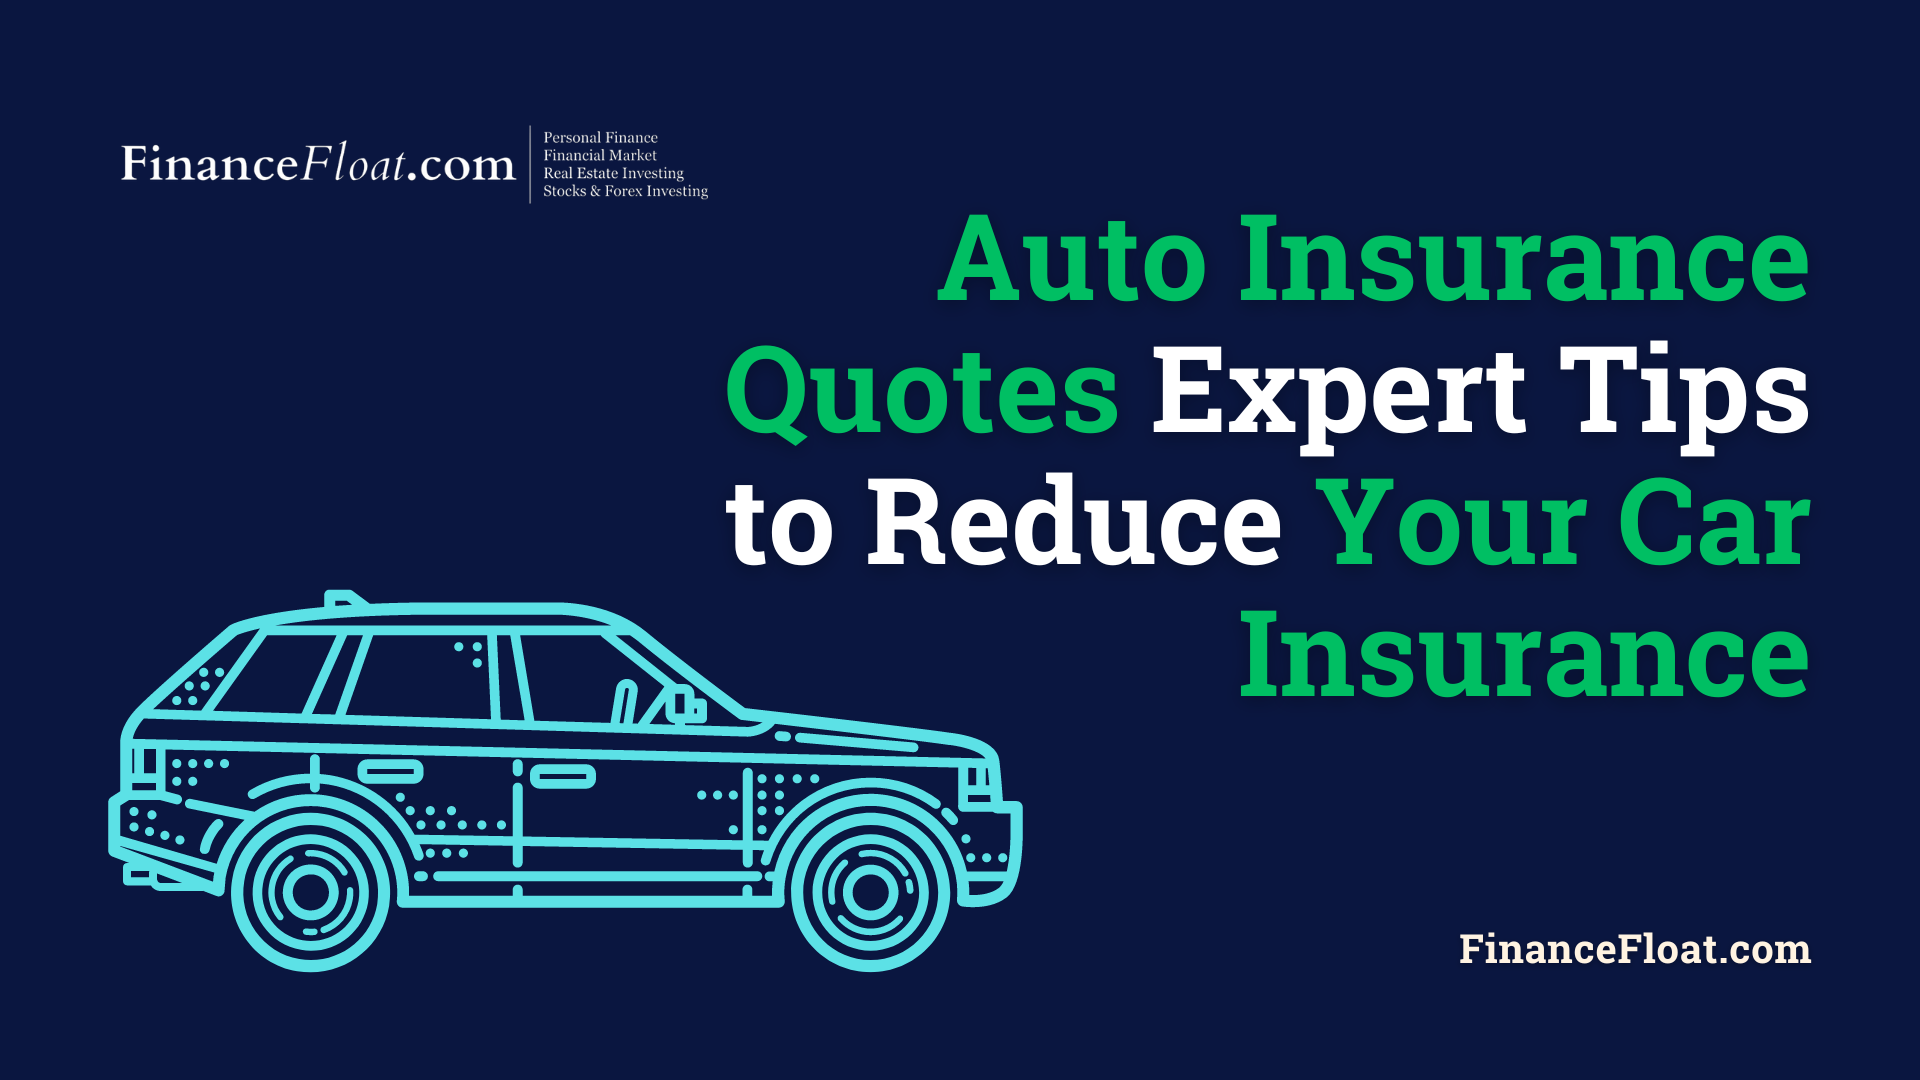 Auto Insurance Quotes Expert Tips to Reduce Your Car Insurance